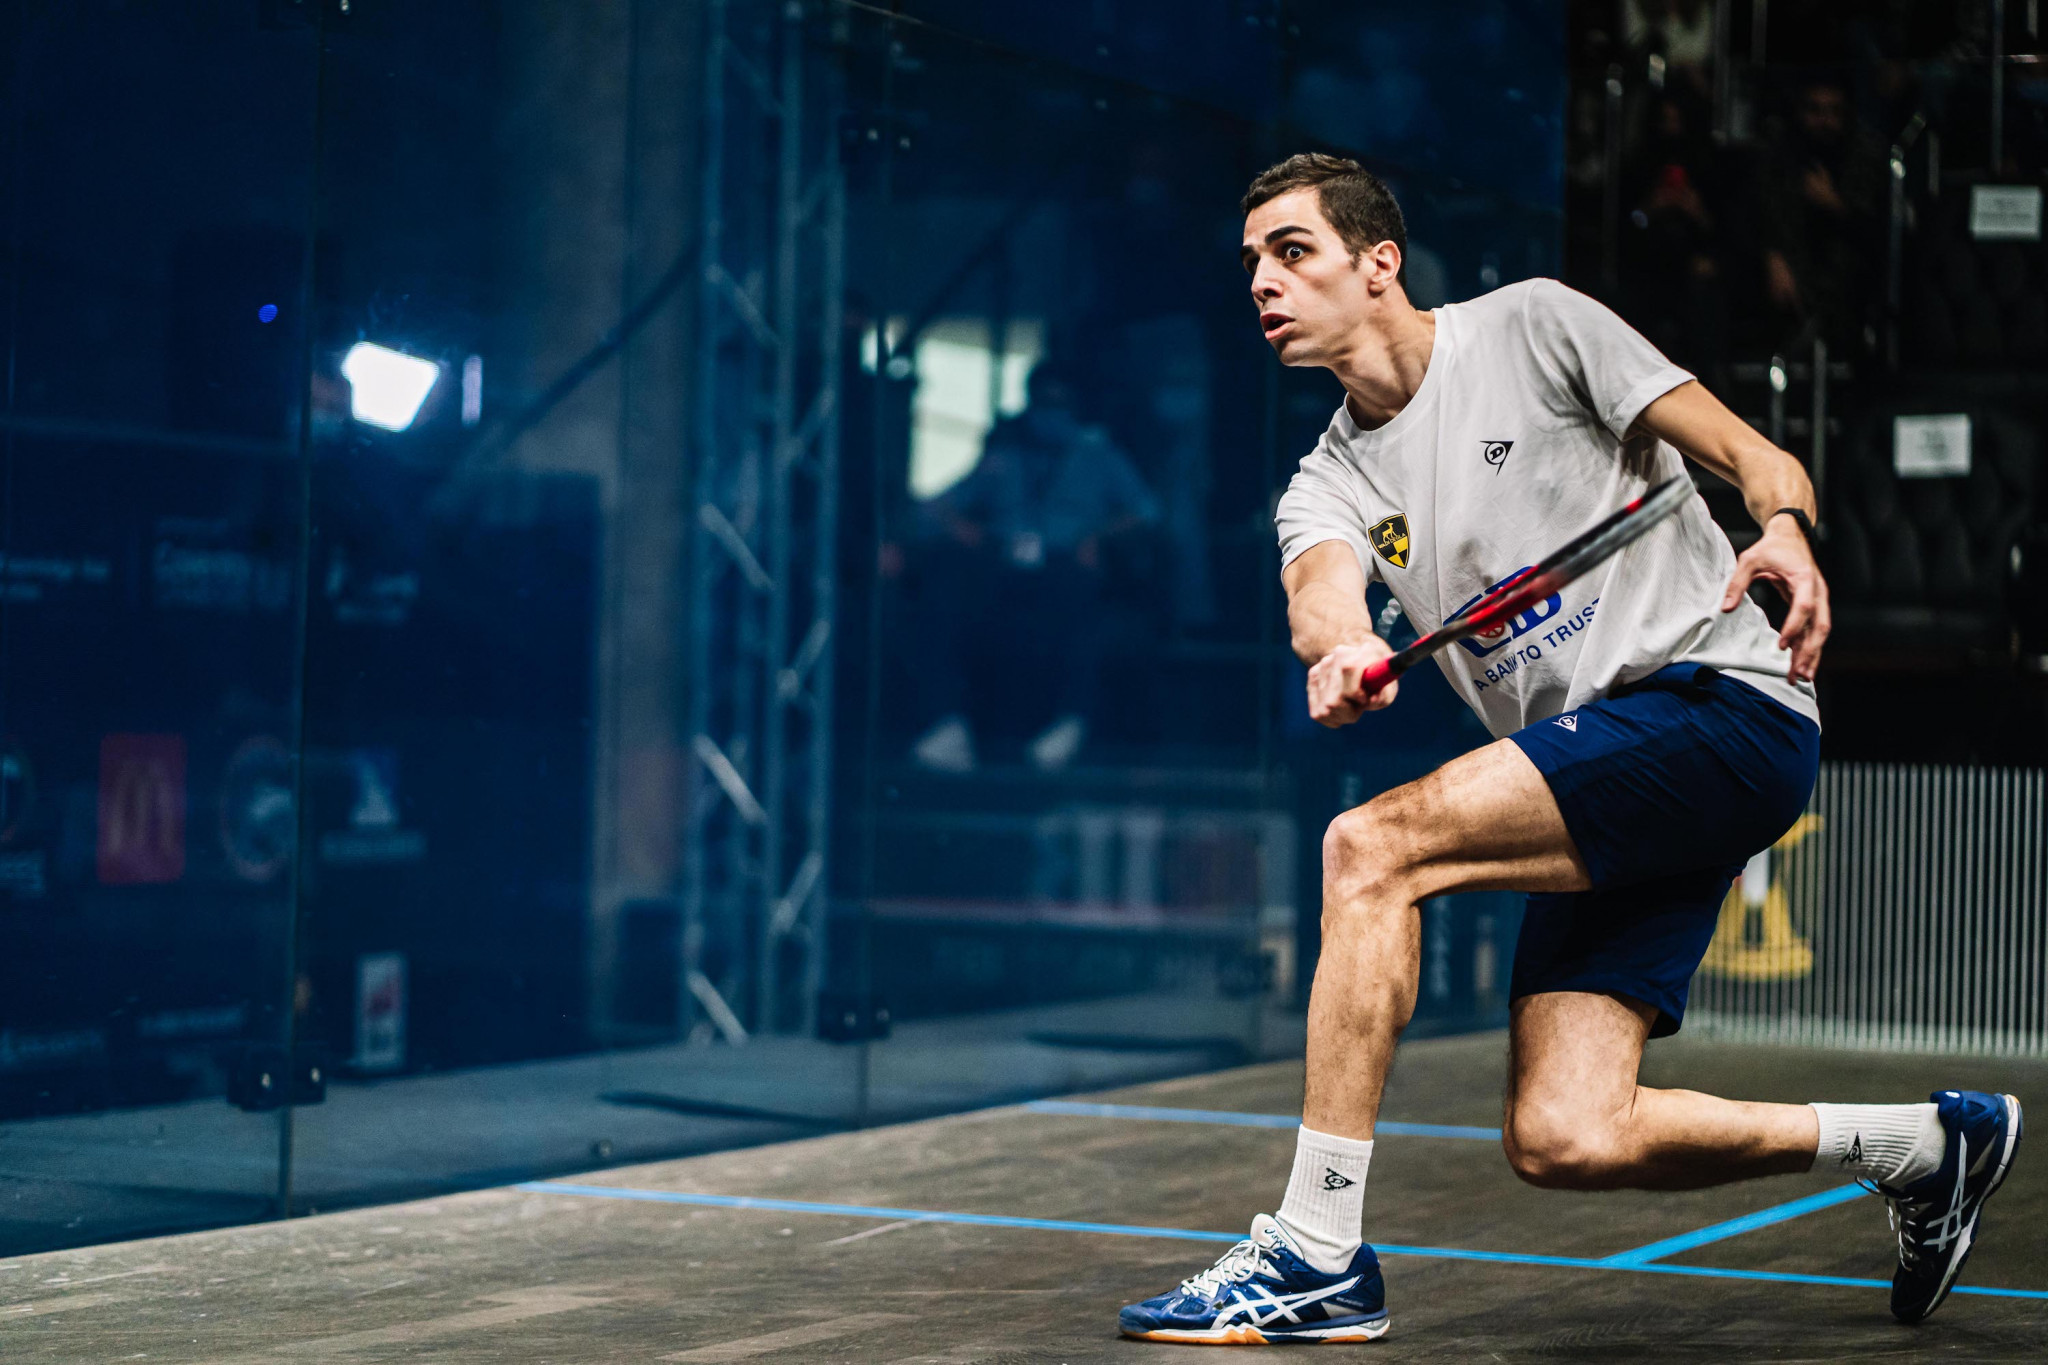 Egypt's Ali Farag remains unmoved at the top of the men's world rankings ©PSA